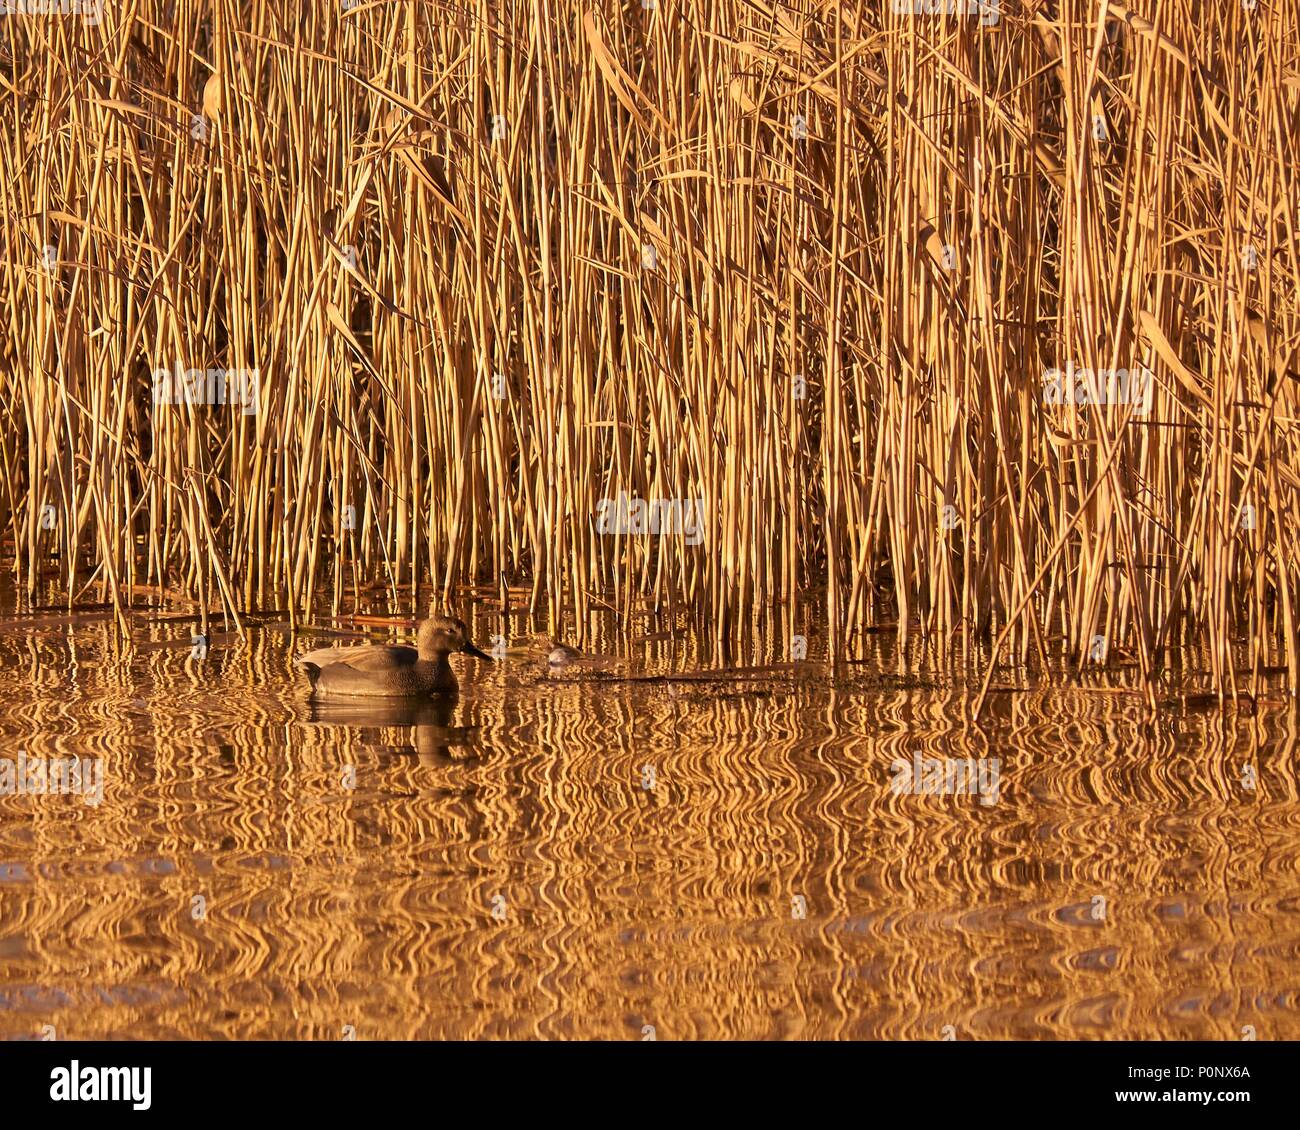 gadwall and reedbed in golden evening sunlight, Aqualate Mere NNR, Staffordshire, England, UK Stock Photo